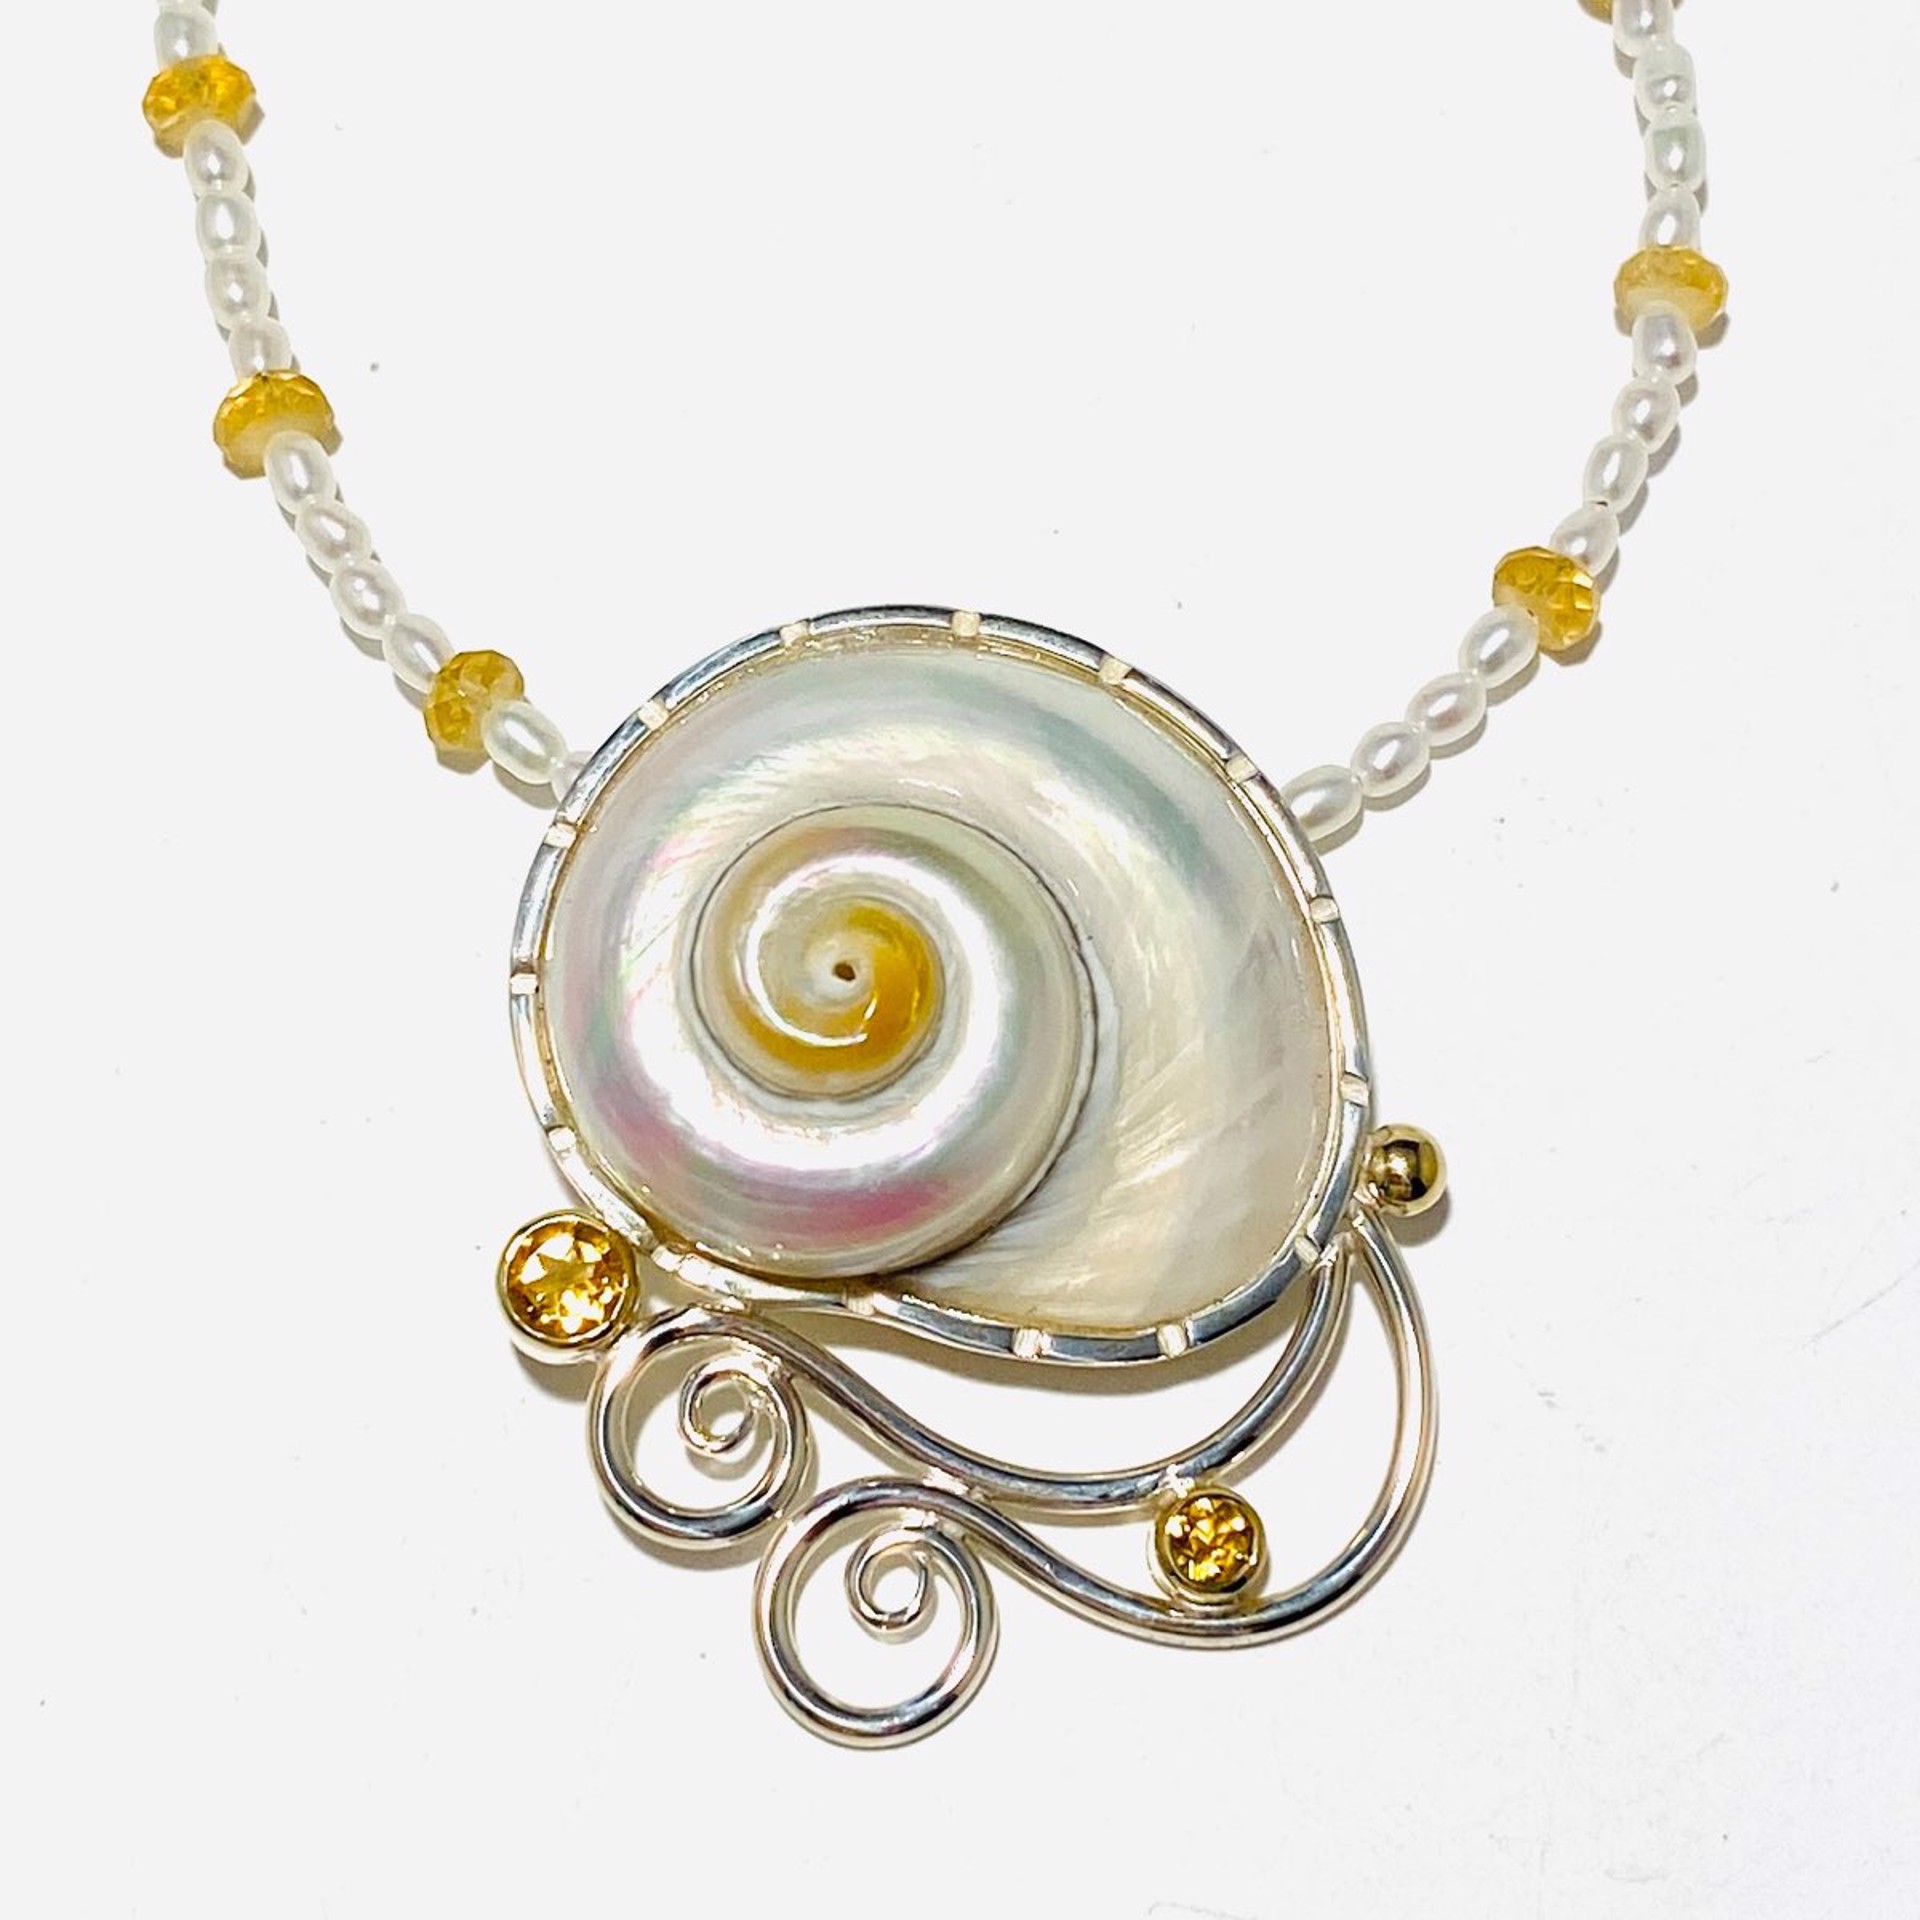 Thailand Cinerus Shell Citrine Pendant With Citrine And Pearl Necklace BU23-7 by Barbara Umbel